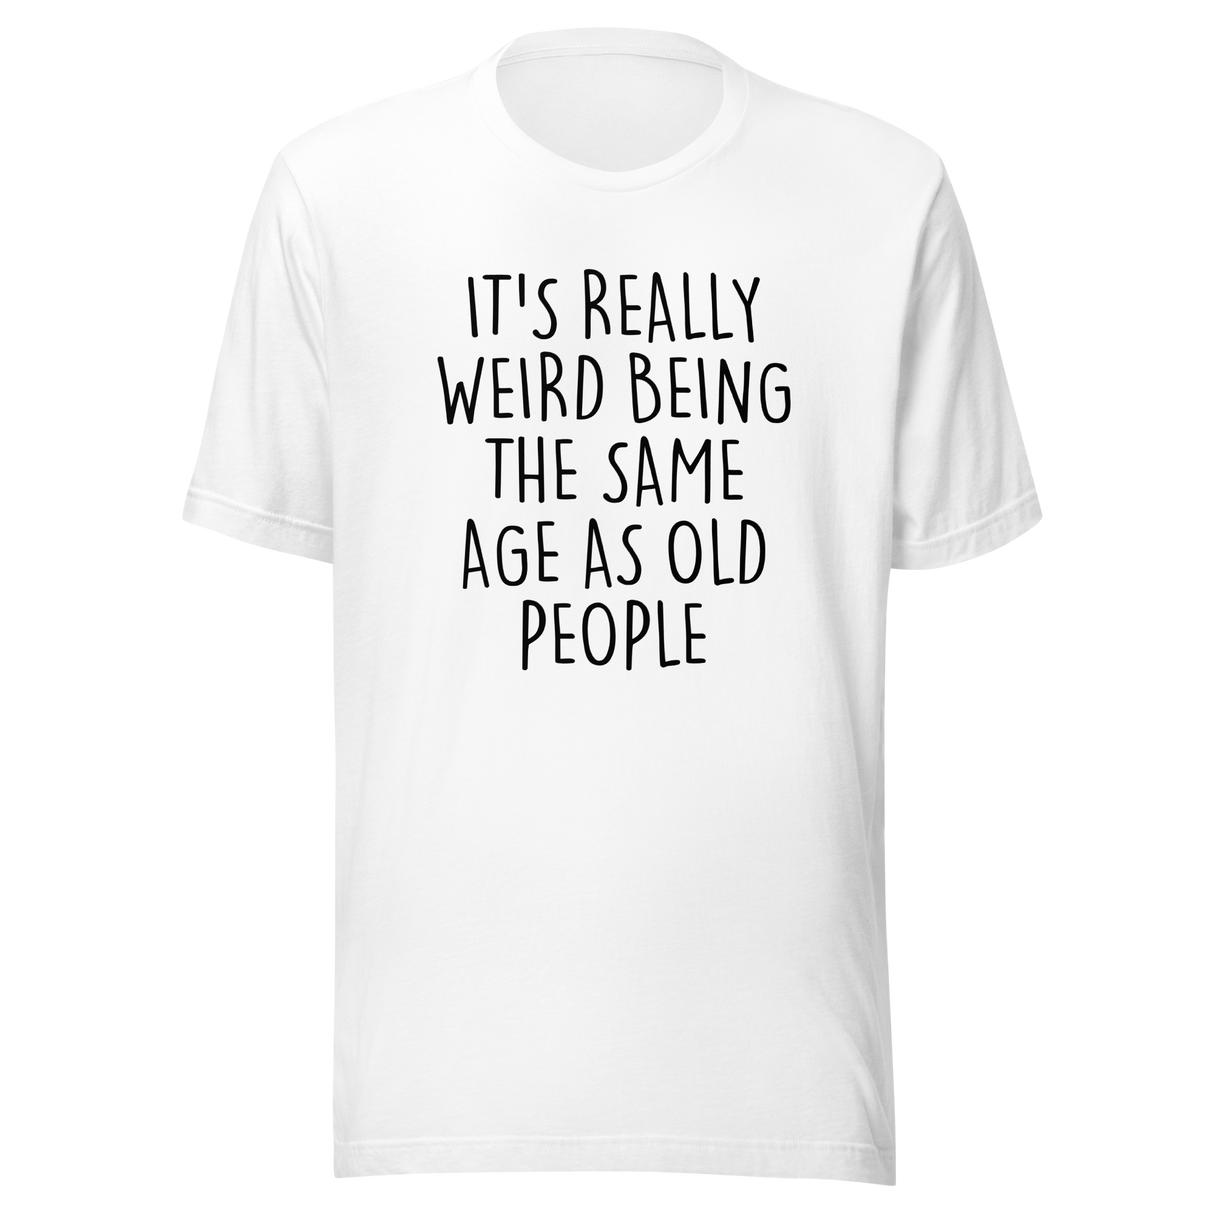 its-weird-being-the-same-age-as-old-people-weird-tee-age-t-shirt-old-tee-t-shirt-tee#color_white